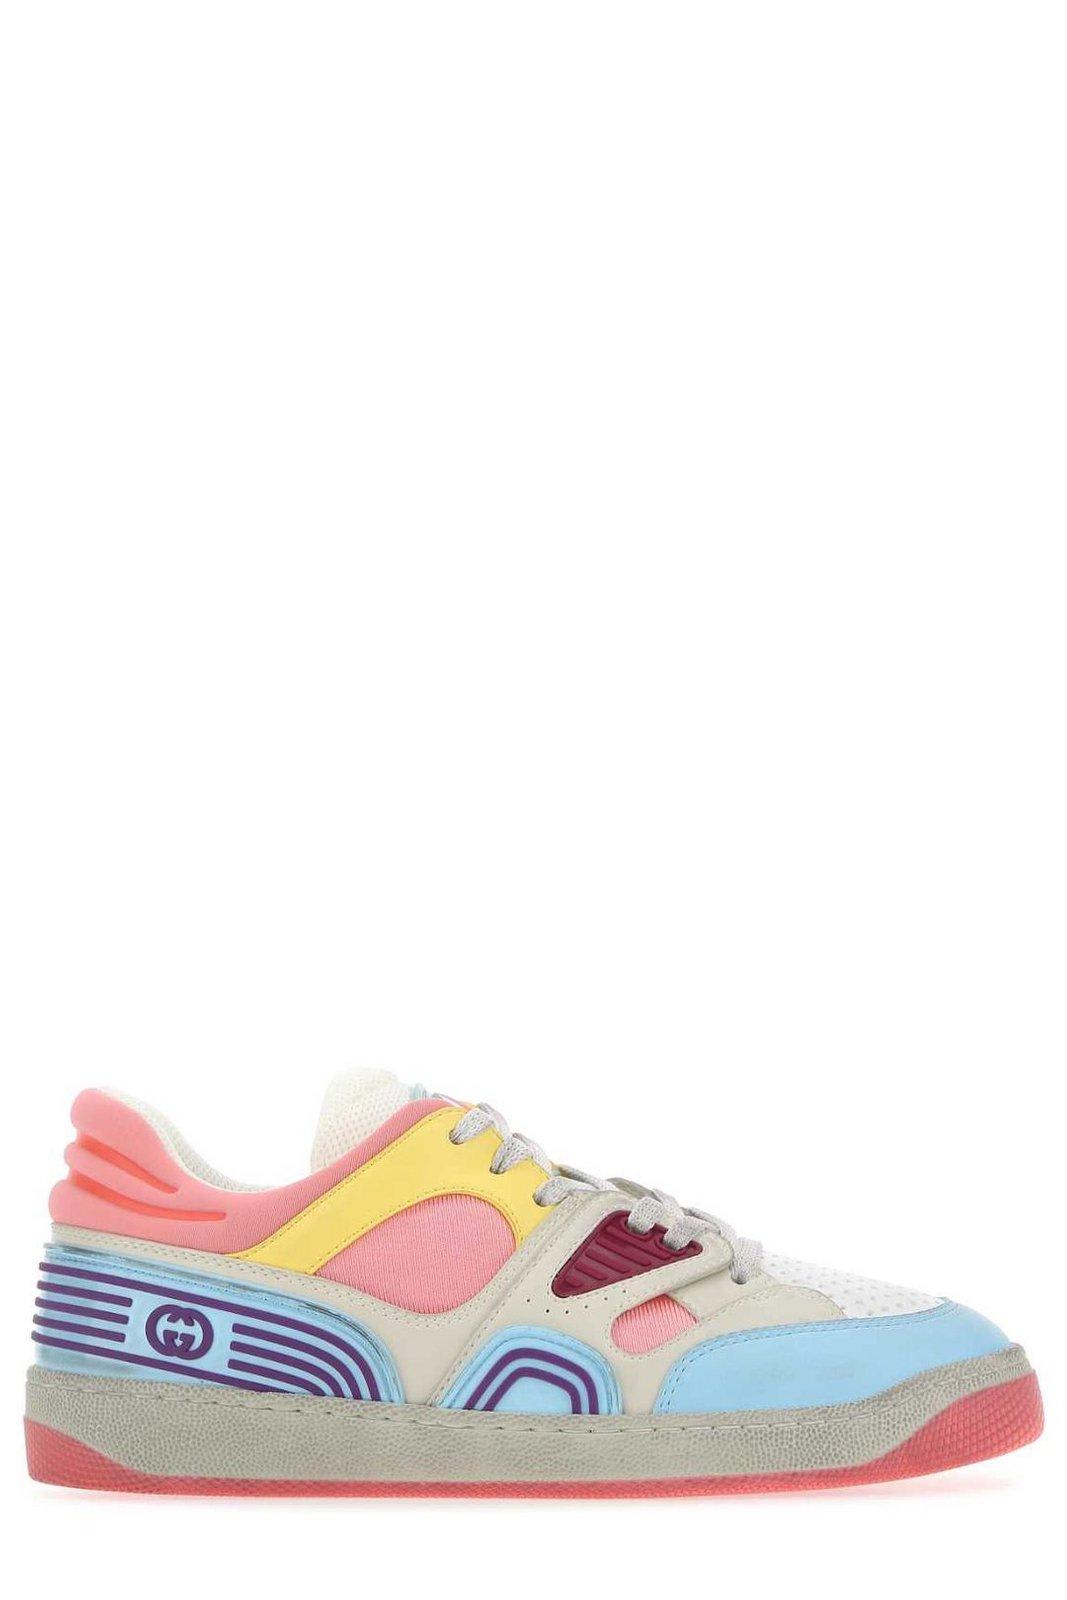 Gucci Basket Lace-up Sneakers